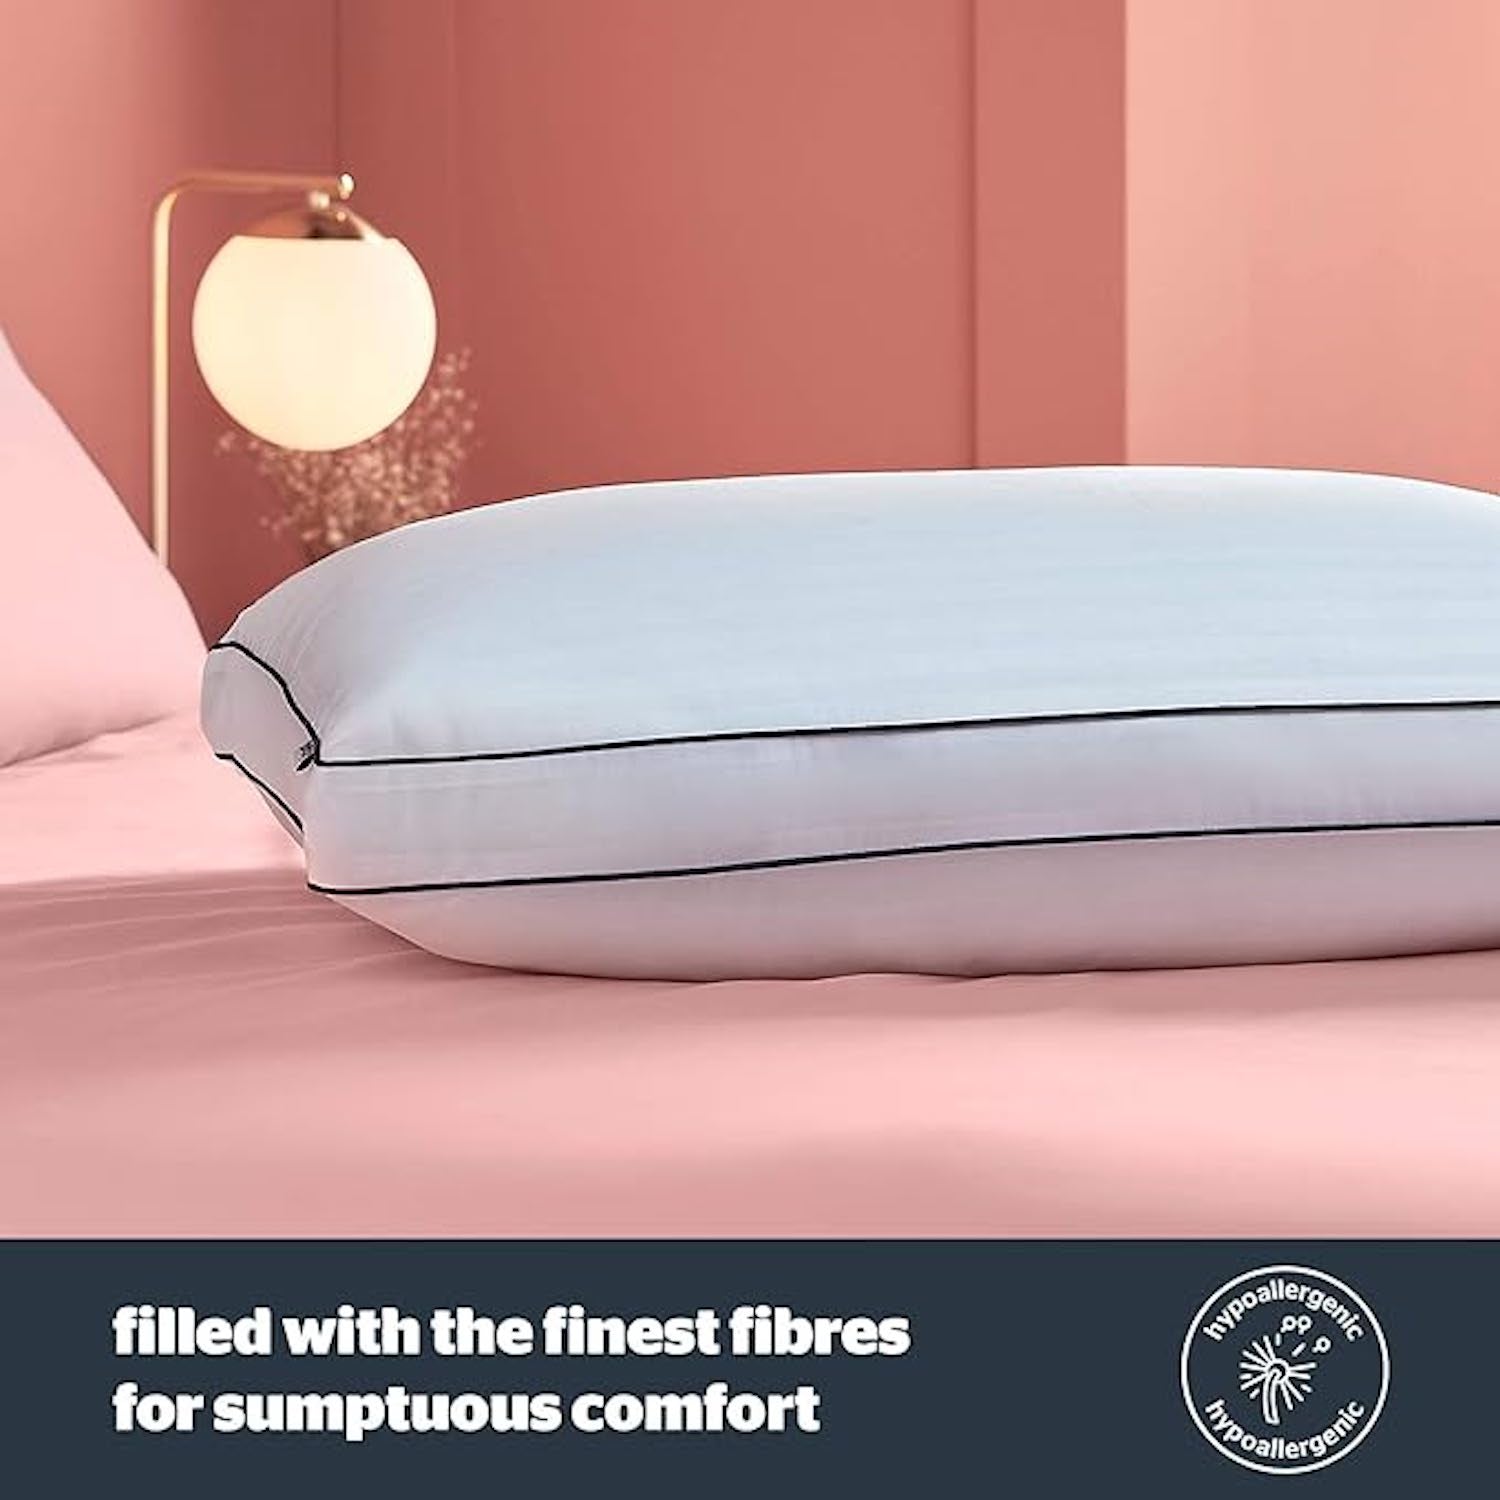 The Silentnight Hotel Collection Box Pillow is filled with the finest fibres for sumptuous comfort 